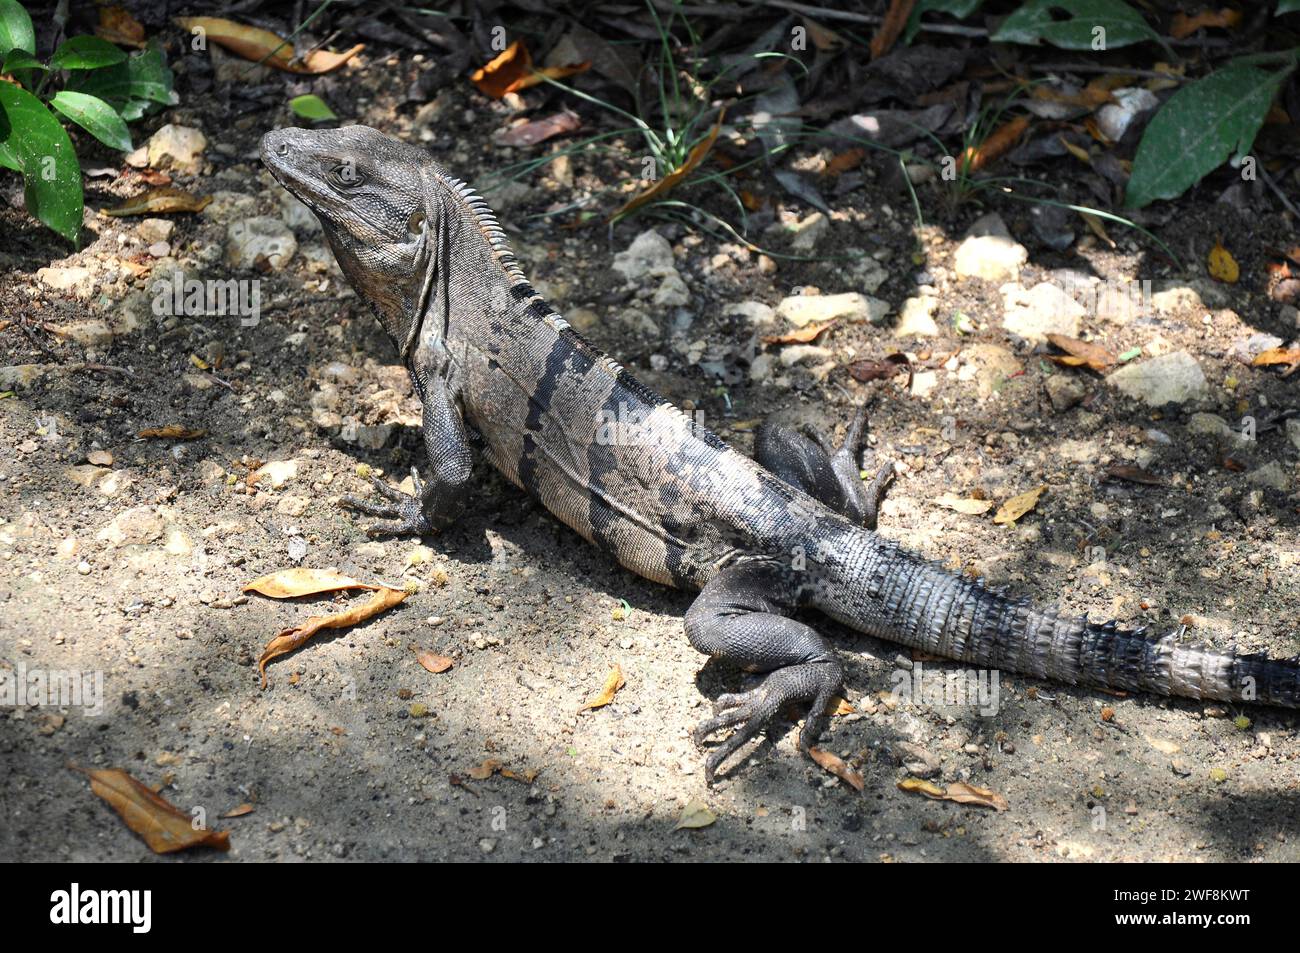 Black iguana or black spiny-tailed iguana (Ctenosaura similis) is a lizard native to Mexico and Central America. This photo was taken in Tulum, Mexico Stock Photo